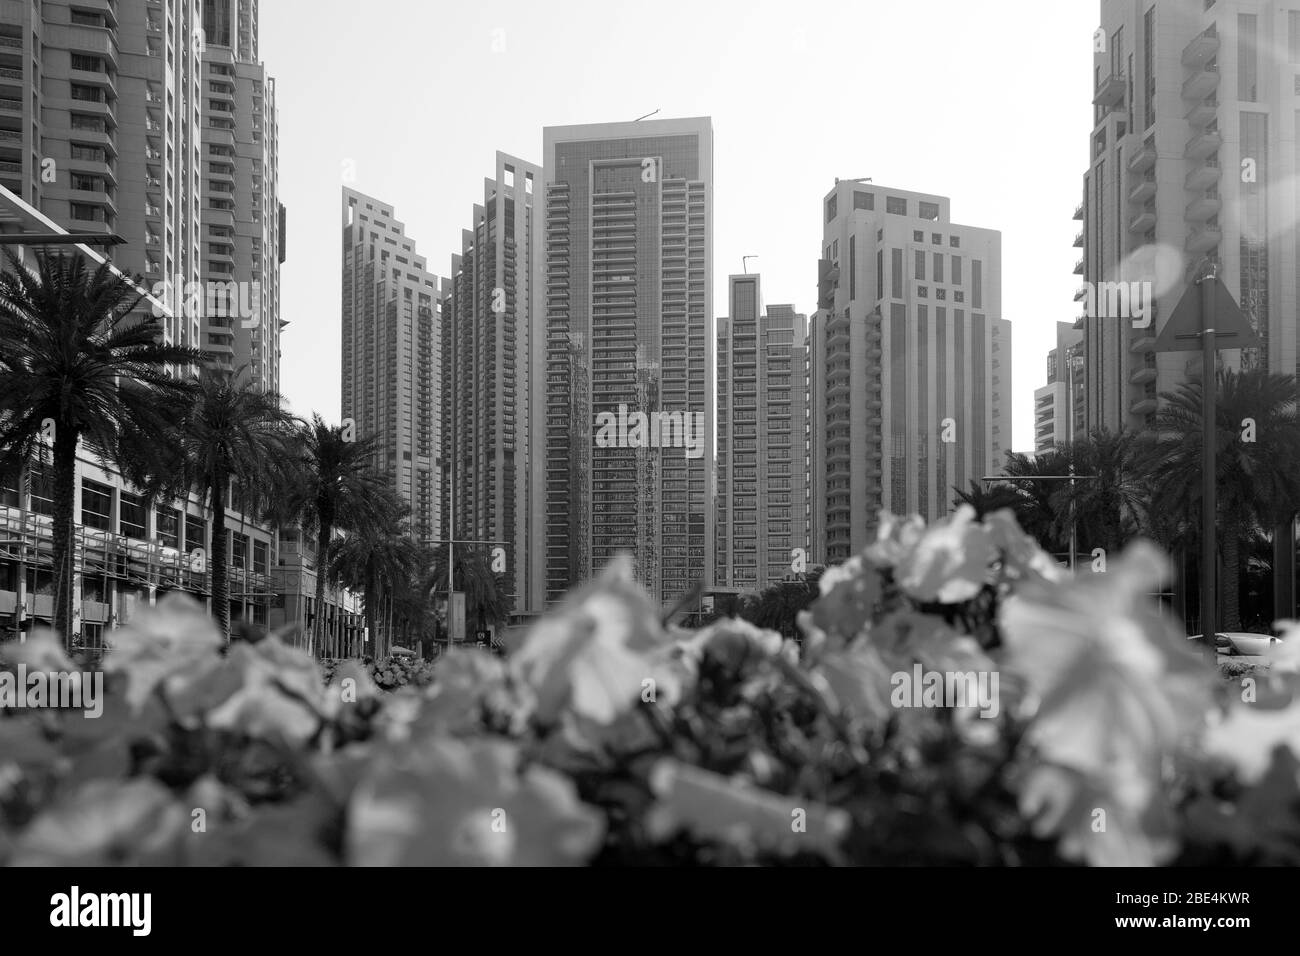 A flower bed with beautiful urban flowers on the background of tall buildings and houses. Black and white image Stock Photo